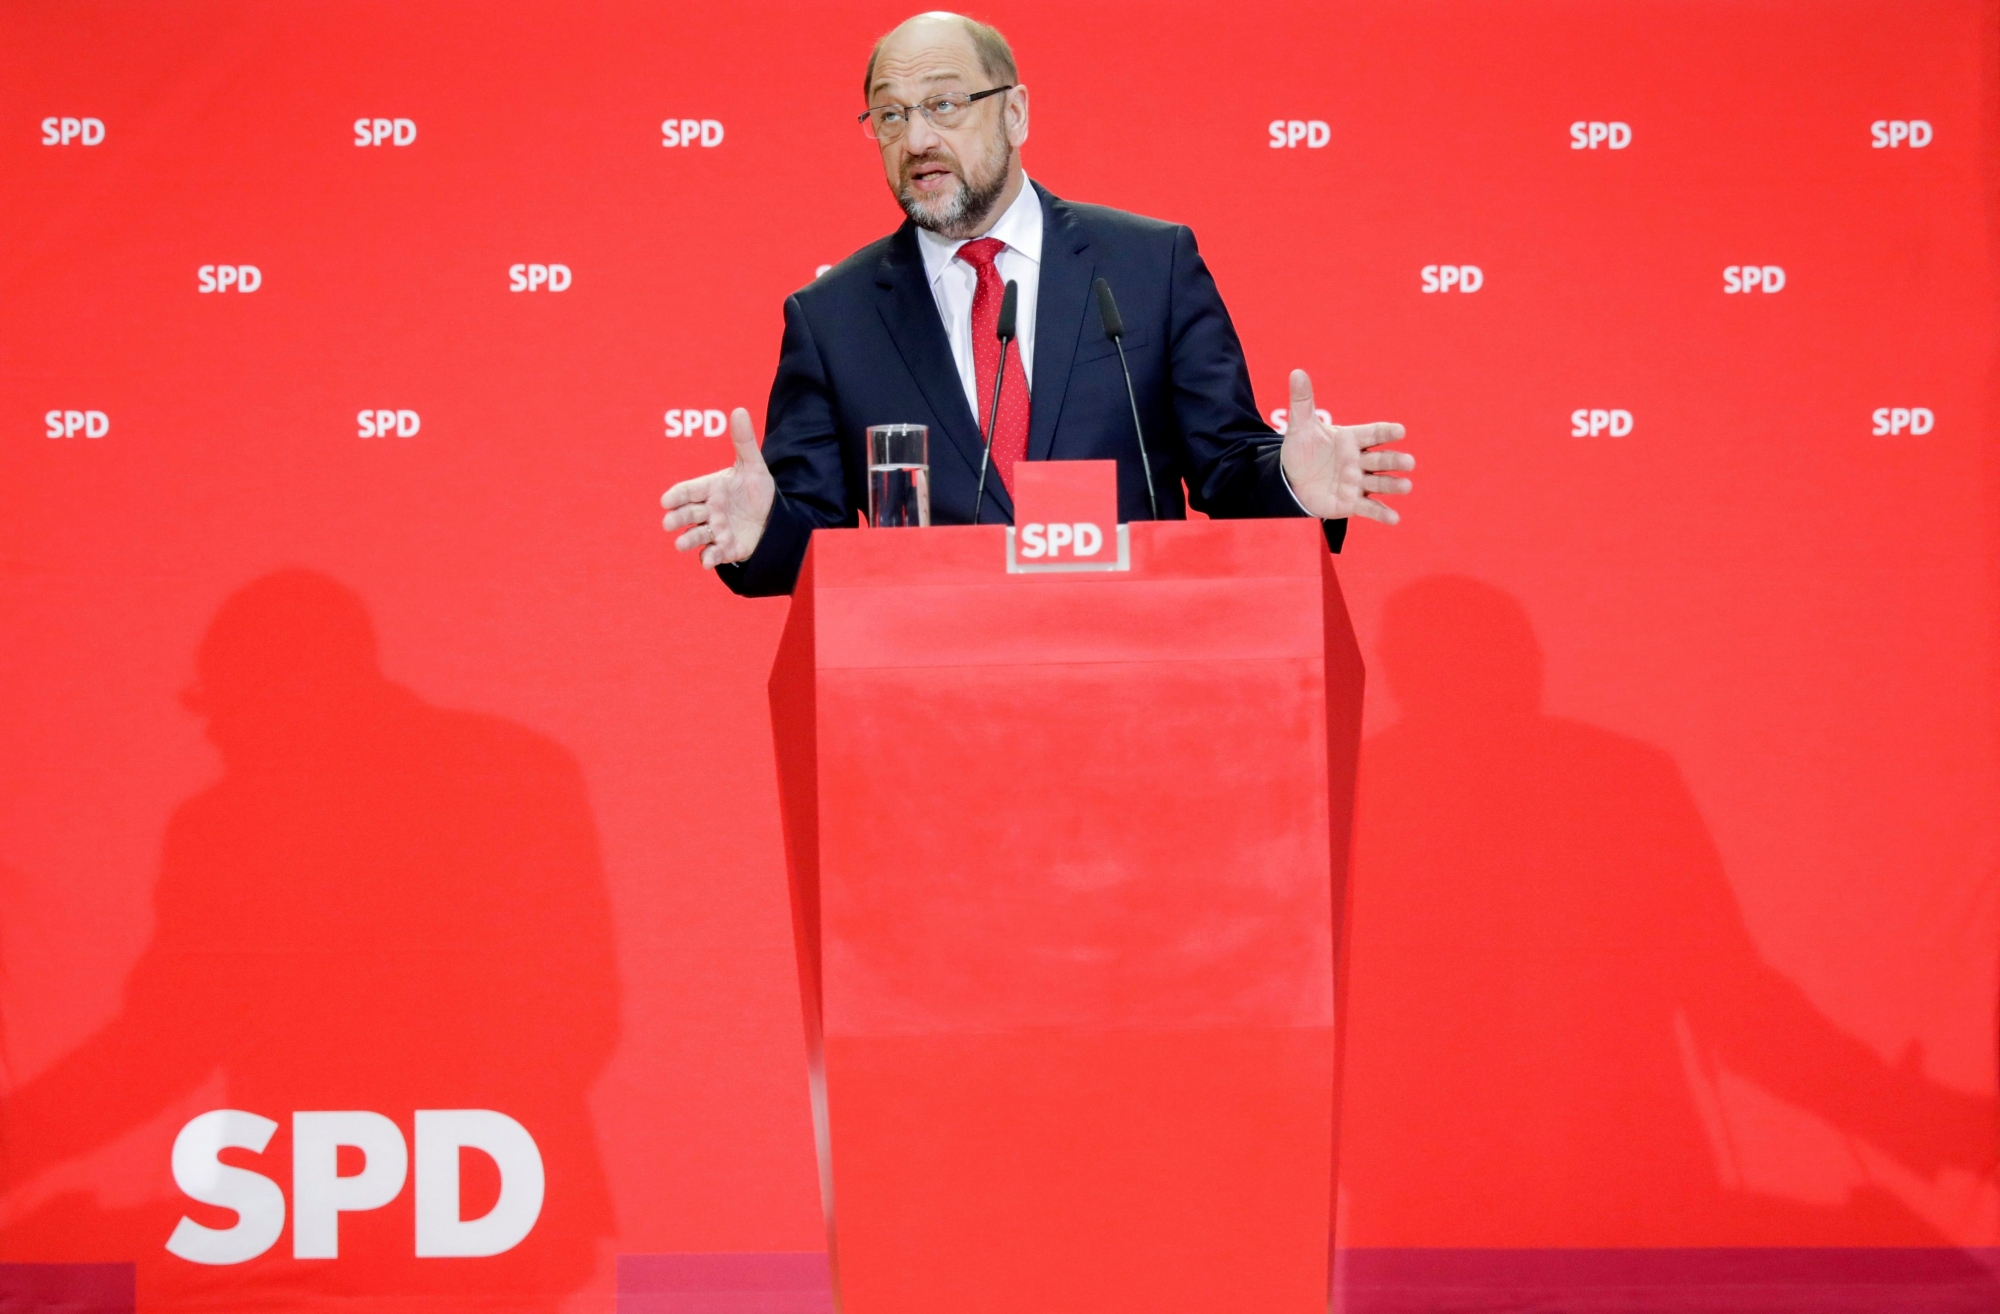 Chairman of Germany's Social Democrats, SPD, Martin Schulz speaks to journalists during a news conference in Berlin, Germany, Friday, Nov. 24, 2017. Schulz told reporters that his center-left party is willing to meet with other parties to discuss "very openly what contribution the SPD can make to forming a new government." (Kay Nietfeld/dpa via AP) Germany Politics